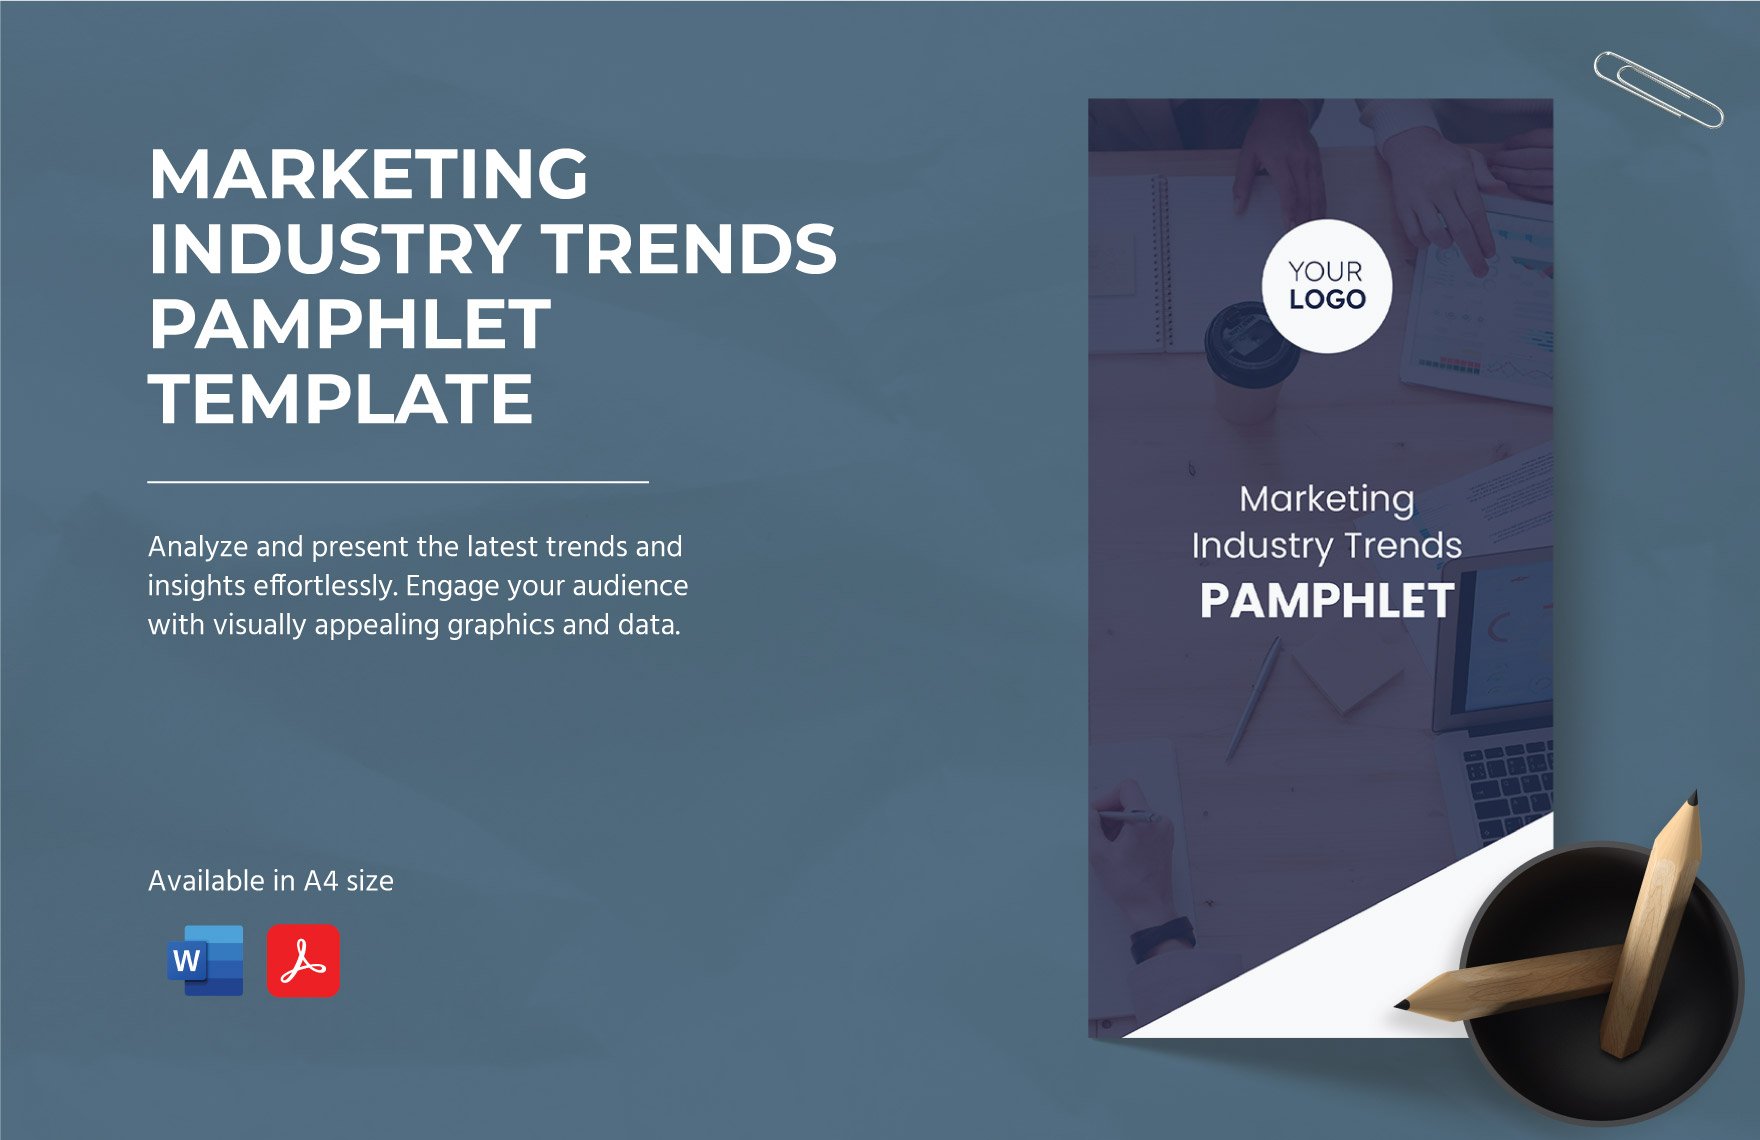 Marketing Industry Trends Pamphlet Template